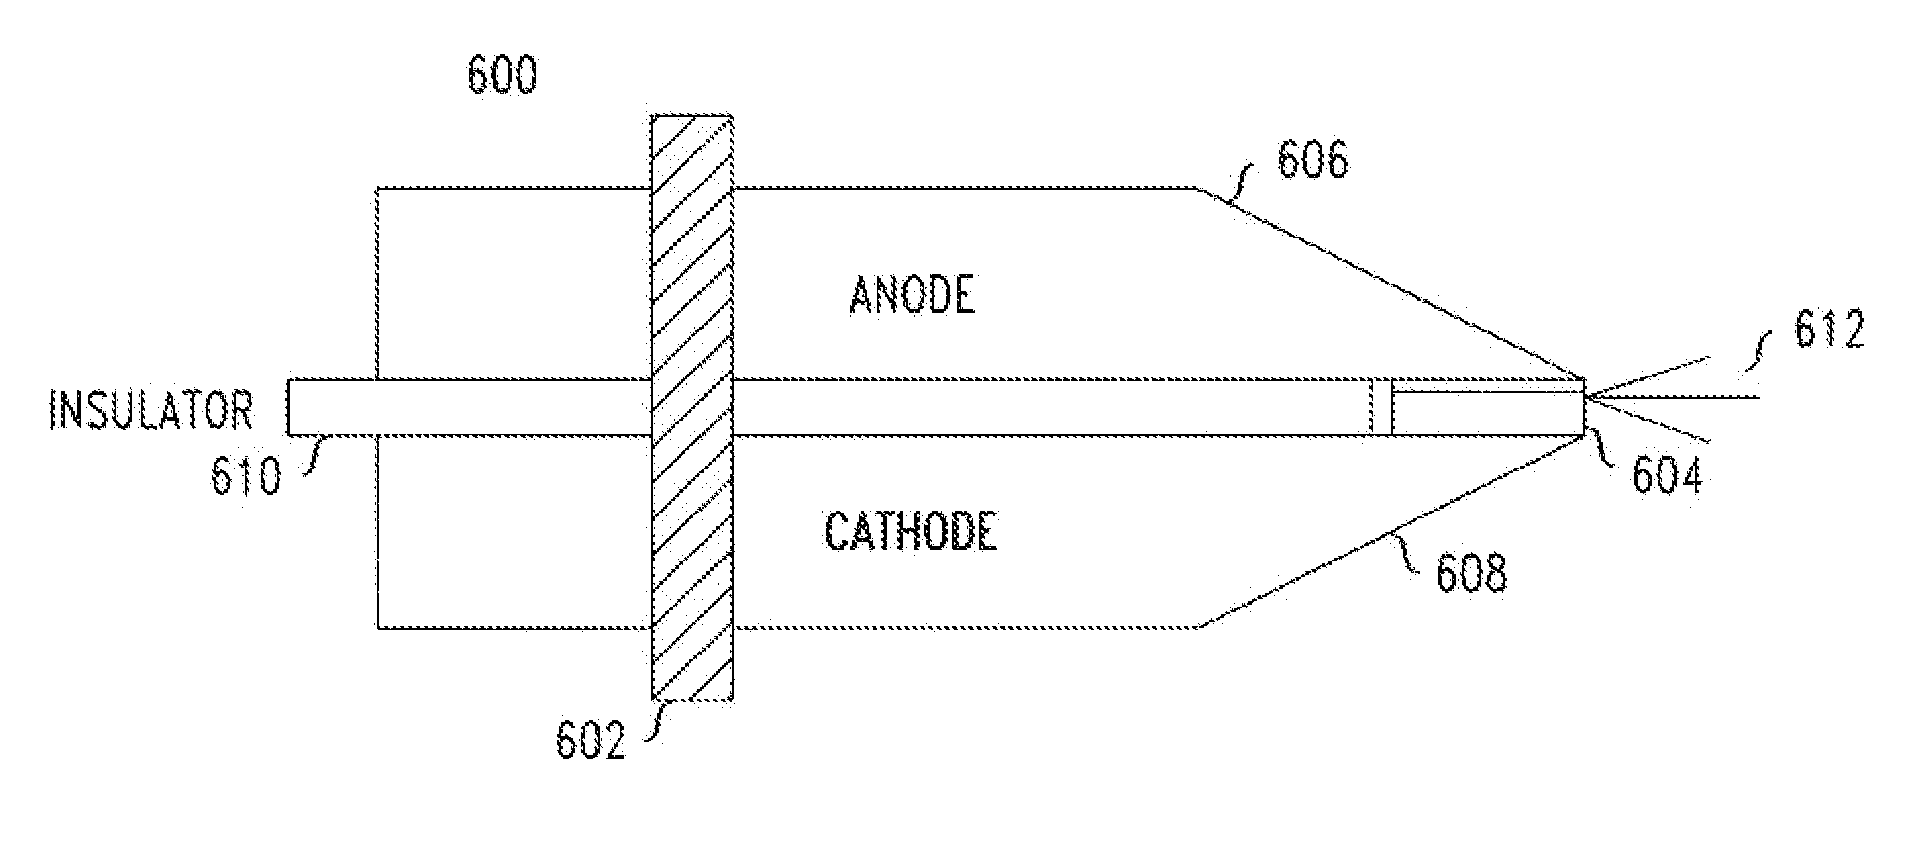 Optical dermatological and medical treatment apparatus having replaceable laser diodes